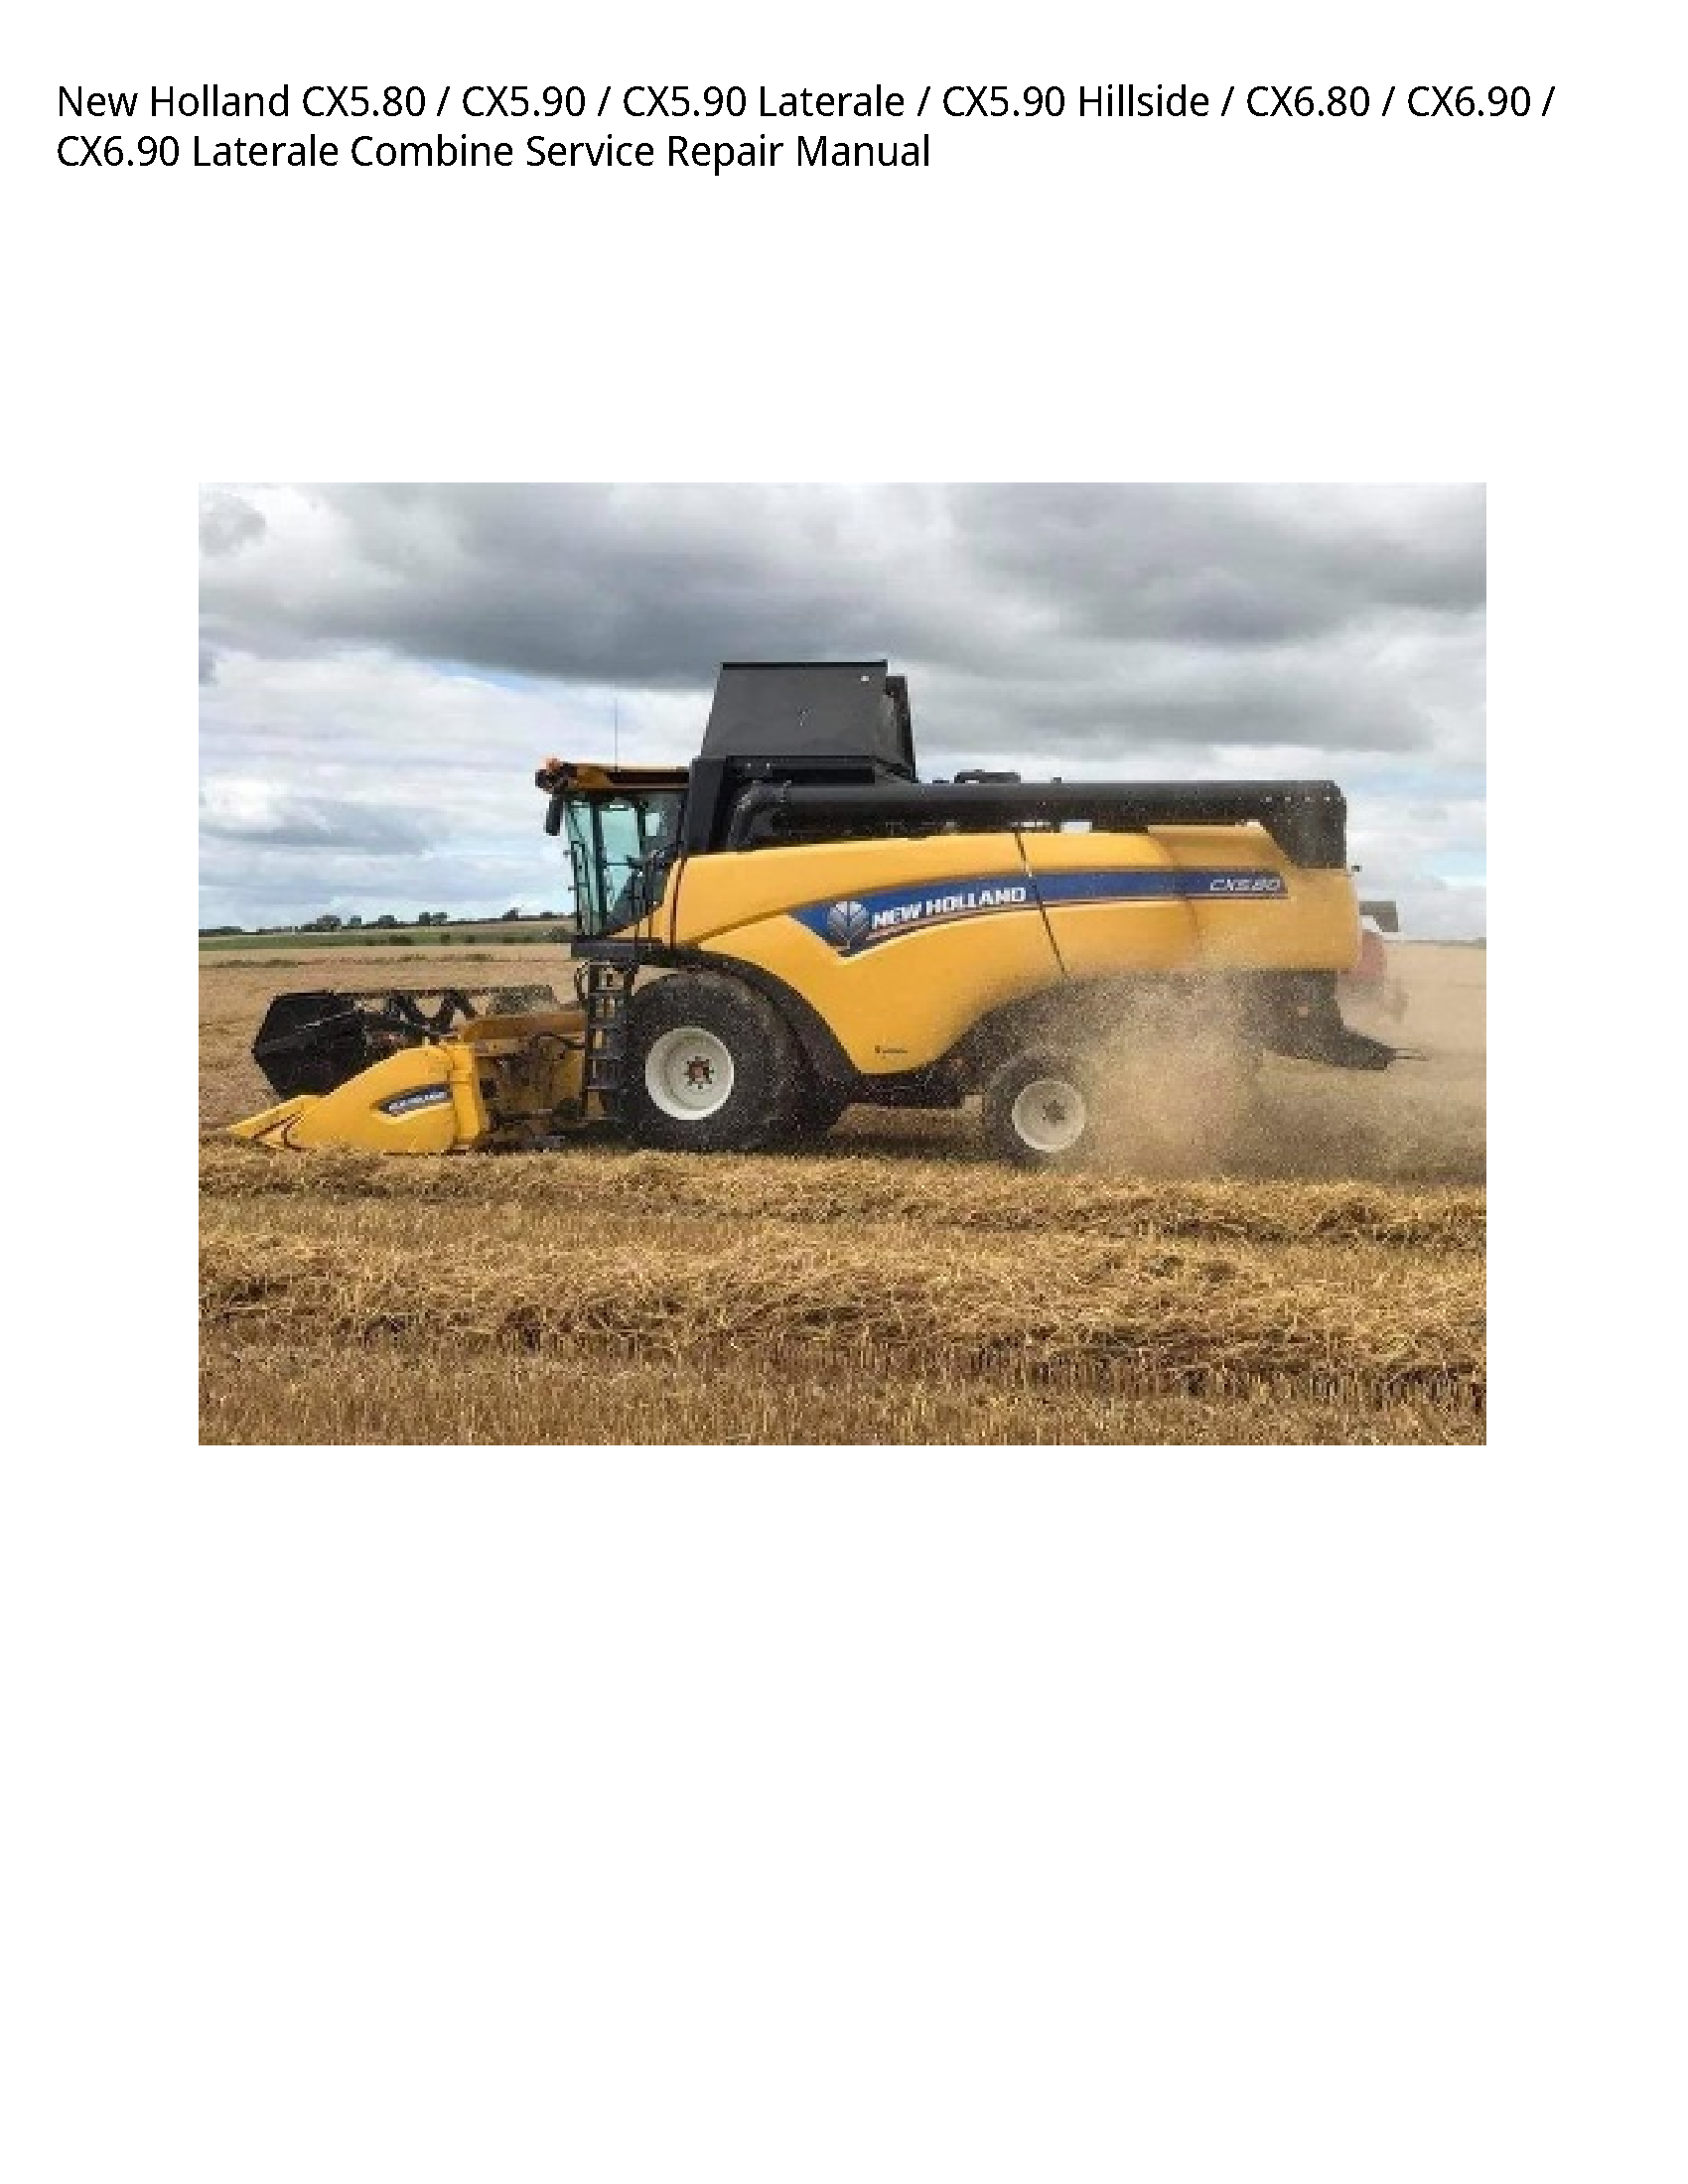 New Holland CX5.80 Laterale Hillside Laterale Combine manual